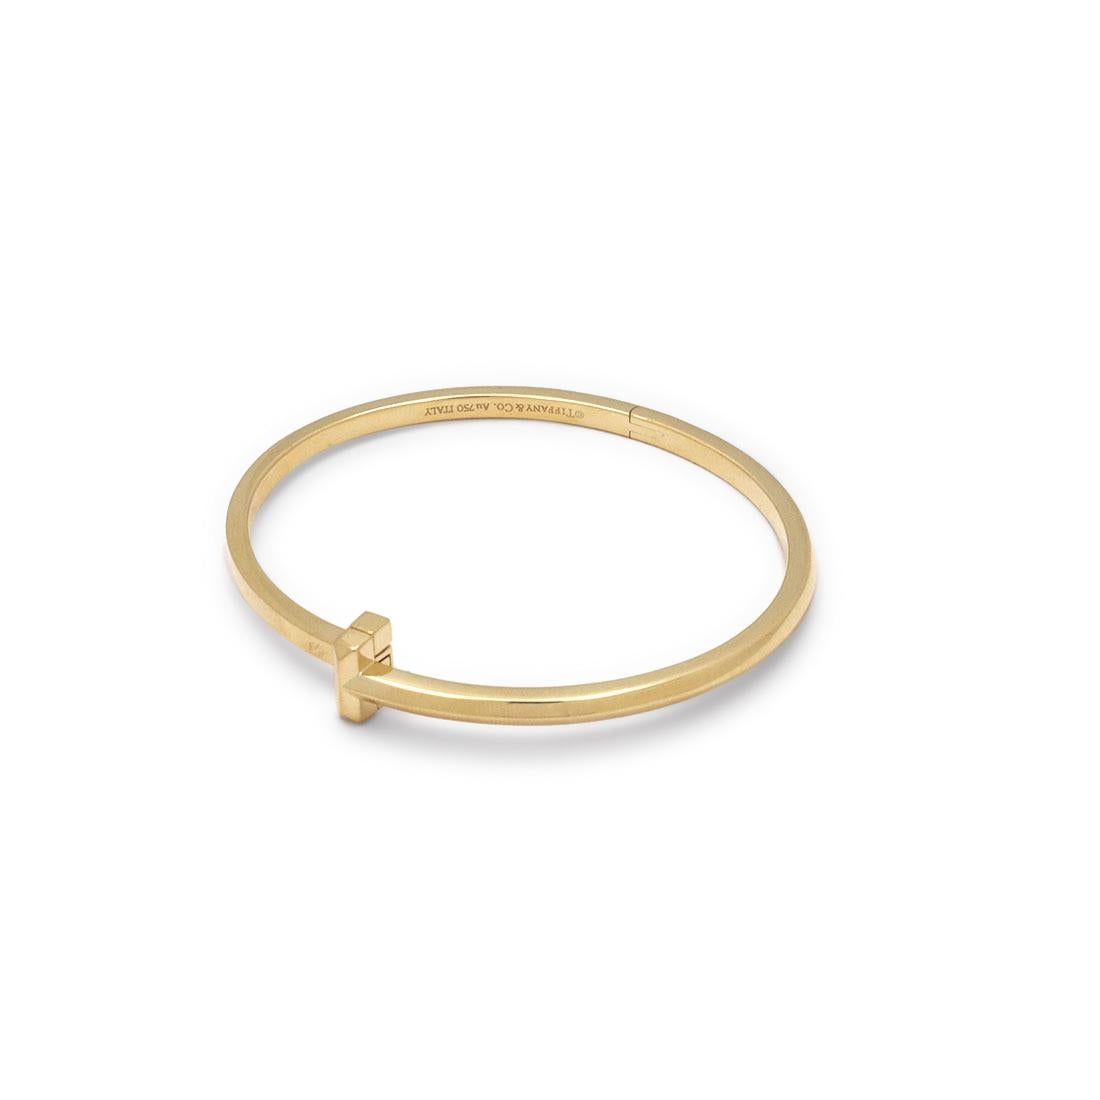 Authentic Tiffany & Co. ' T1 Narrow Hinged' bangle crafted in 18 karat yellow gold. This stunning bangle features a bold 